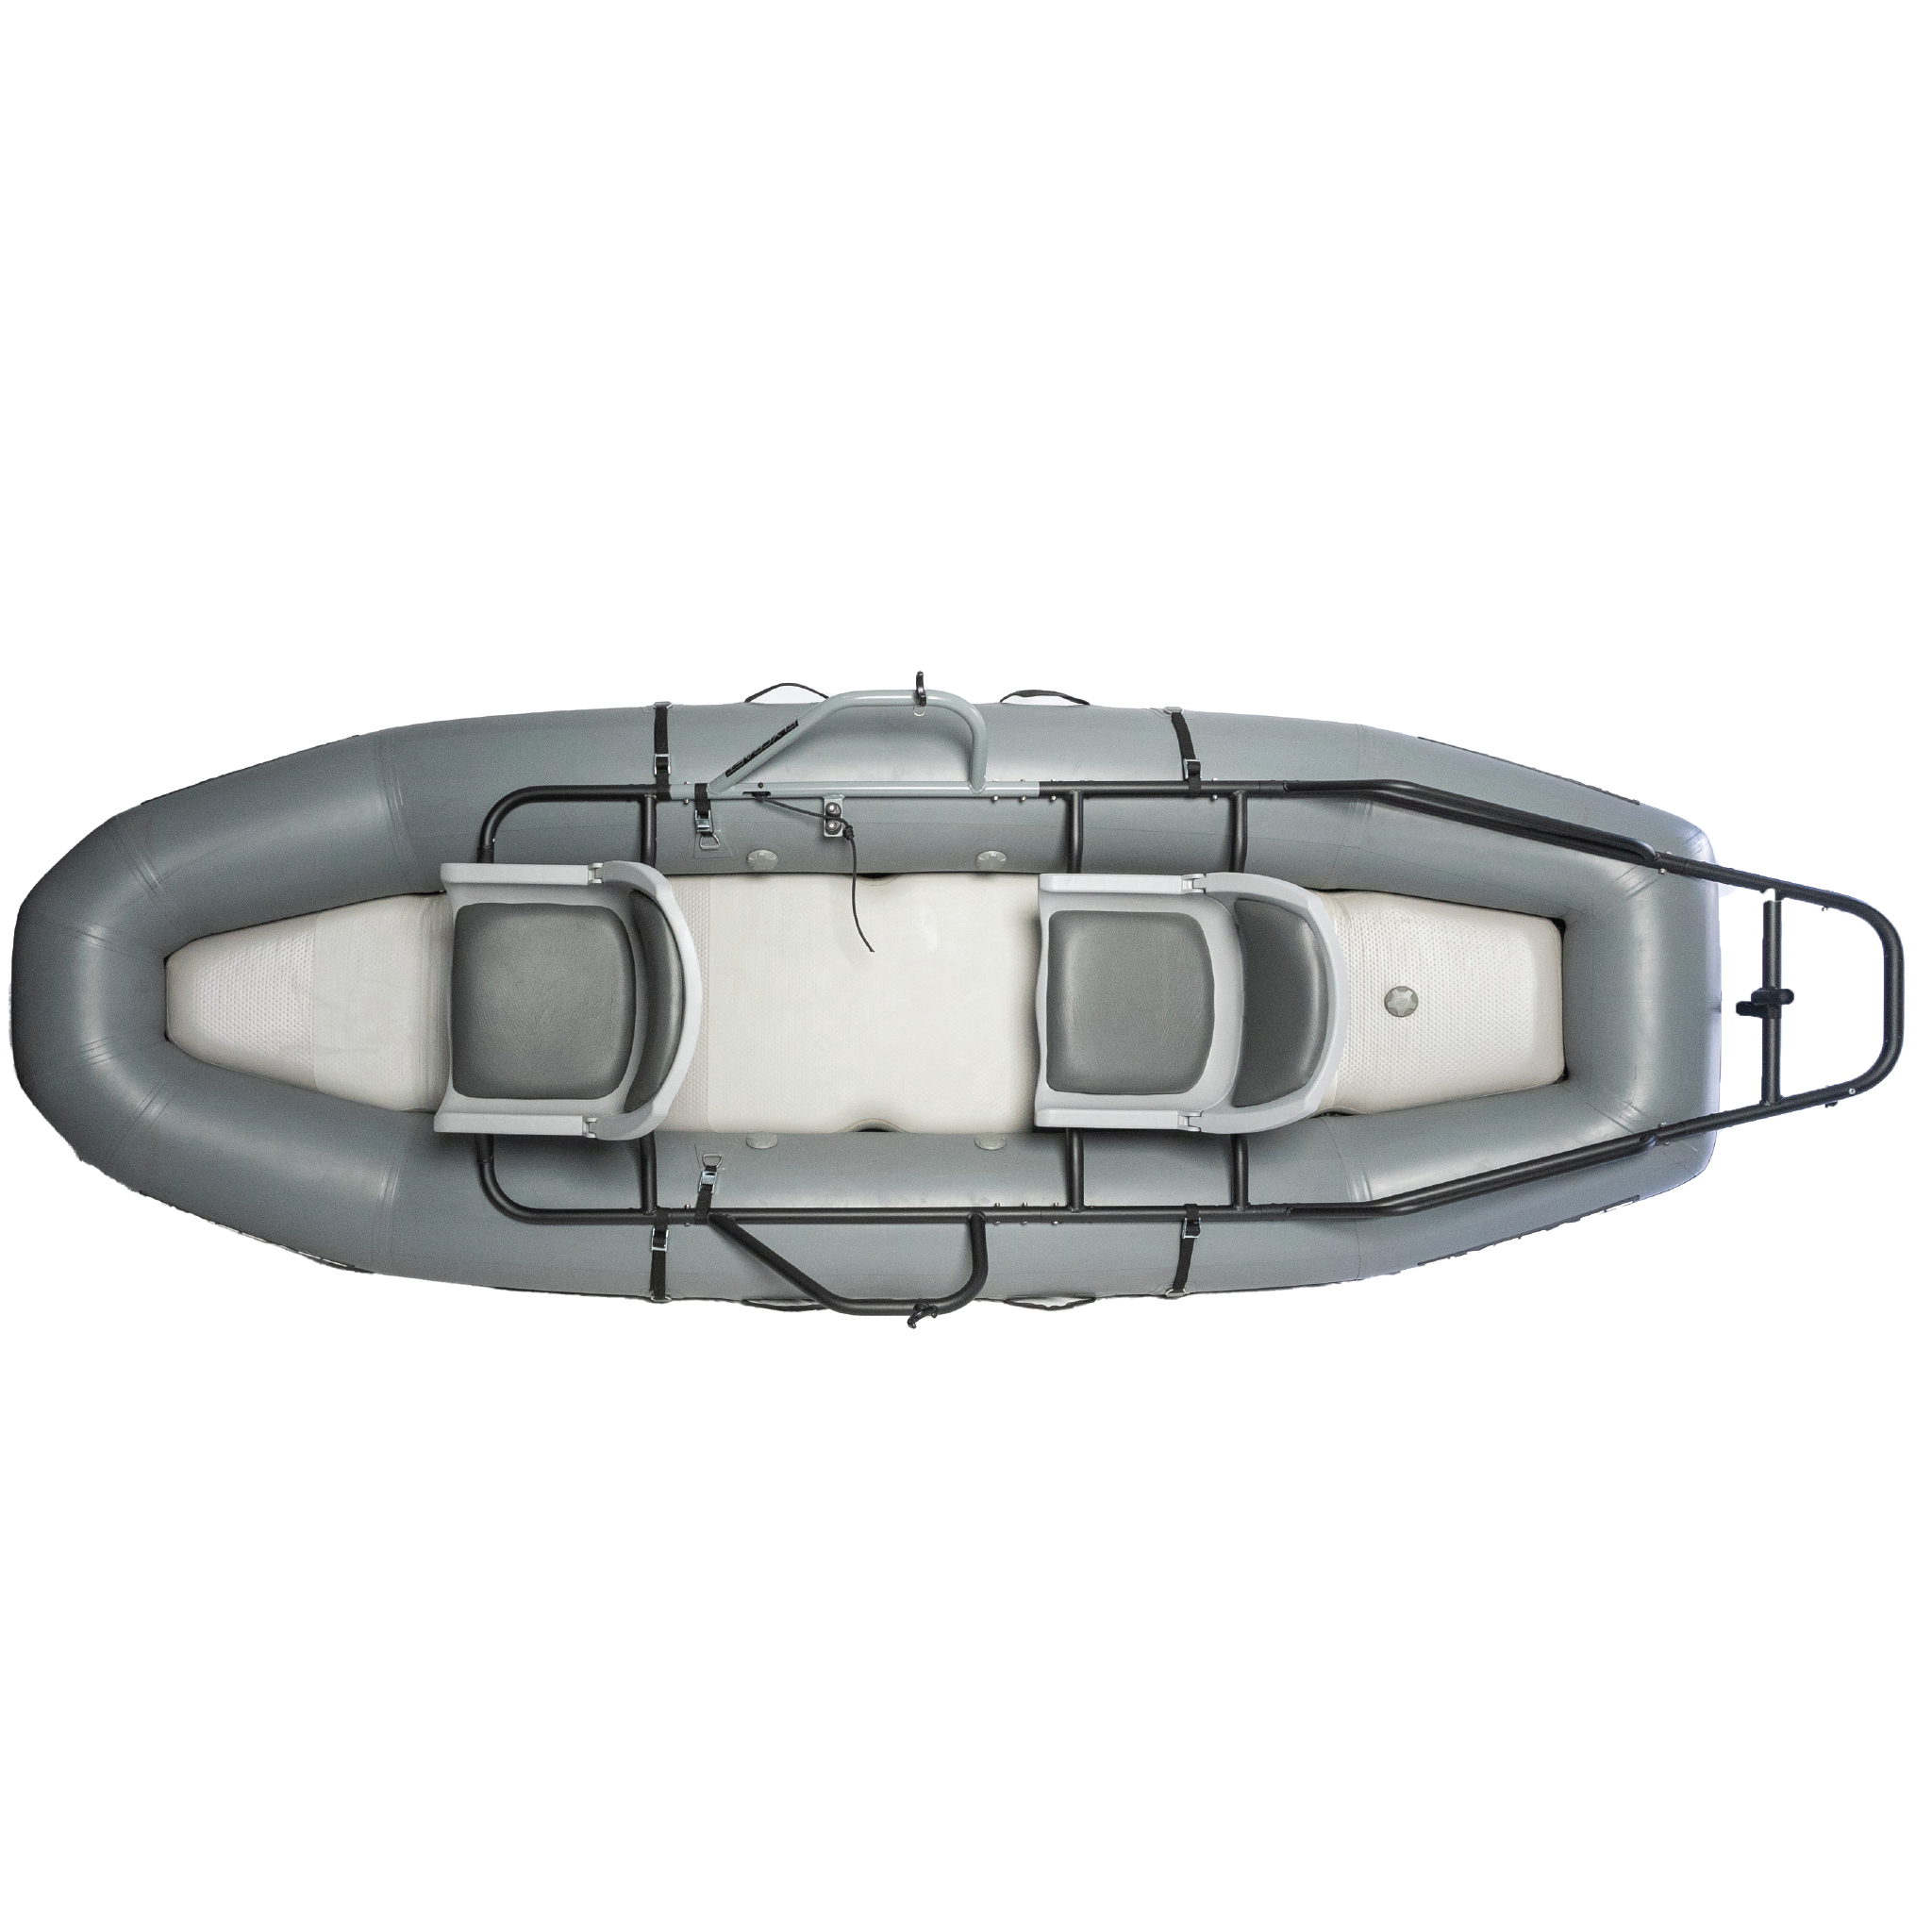 StreamTech Boats - fly fishing inflatable drift boats based in